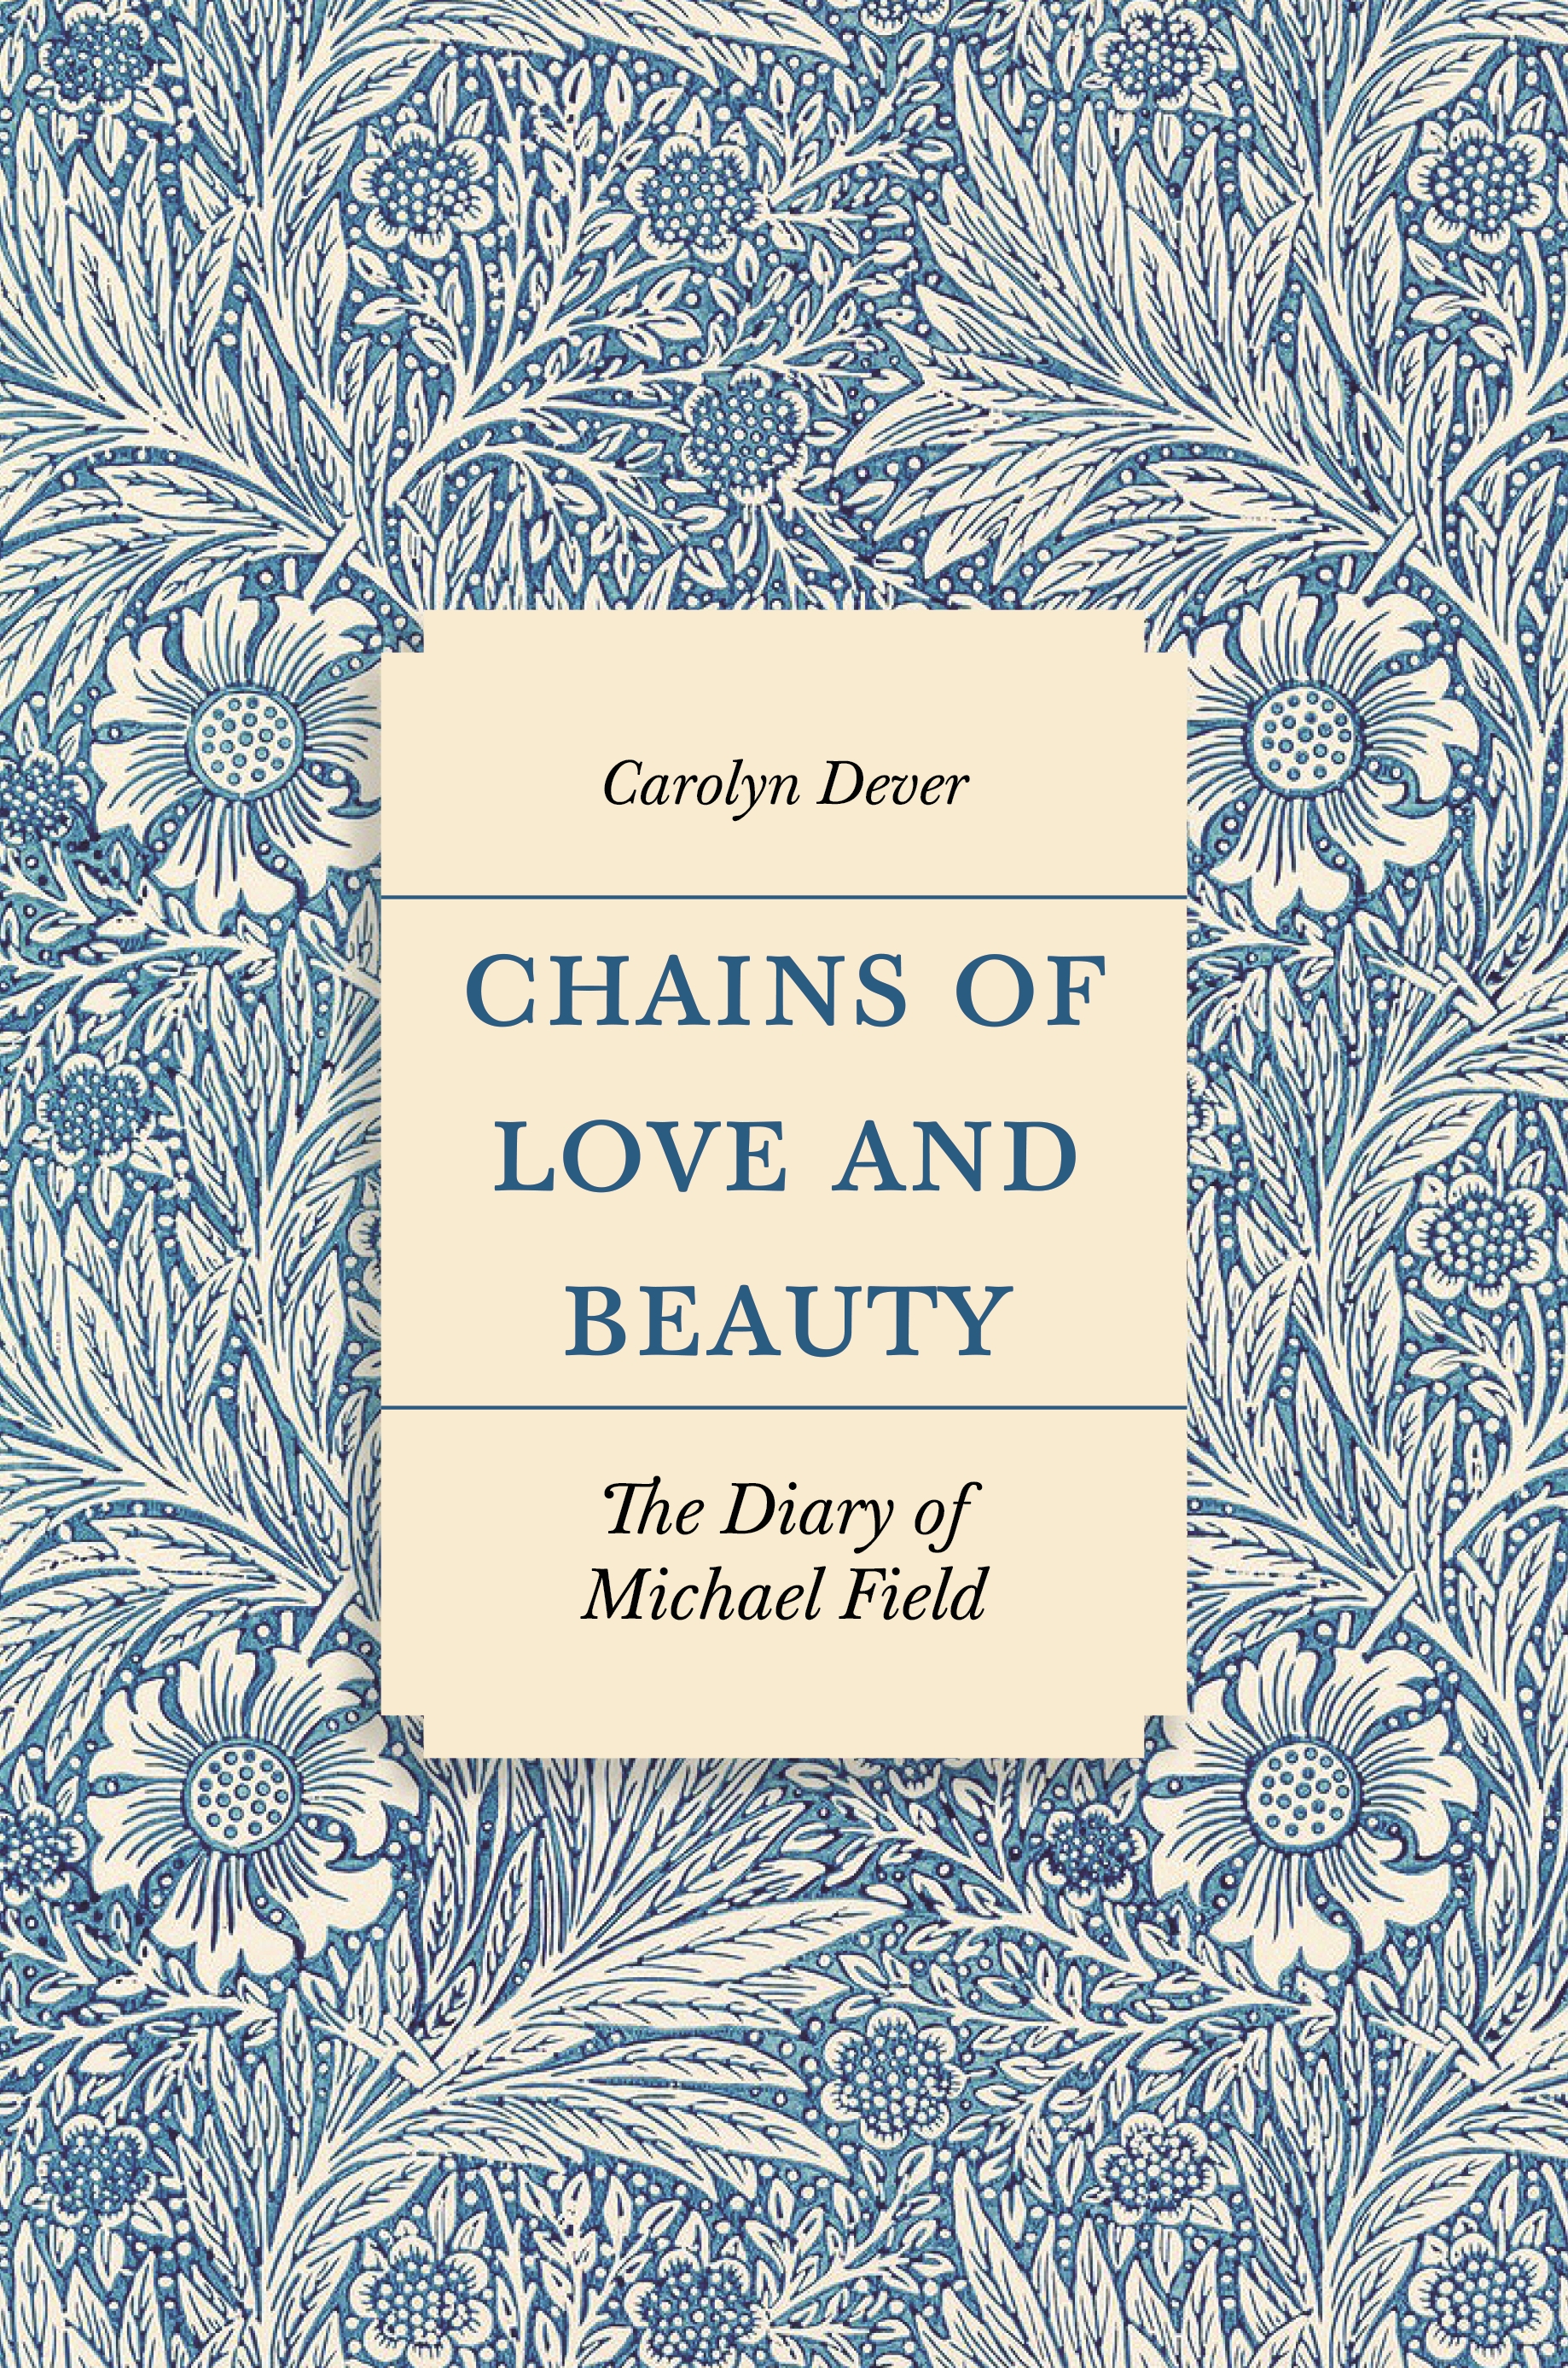 Chains of Love and Beauty  Princeton University Press